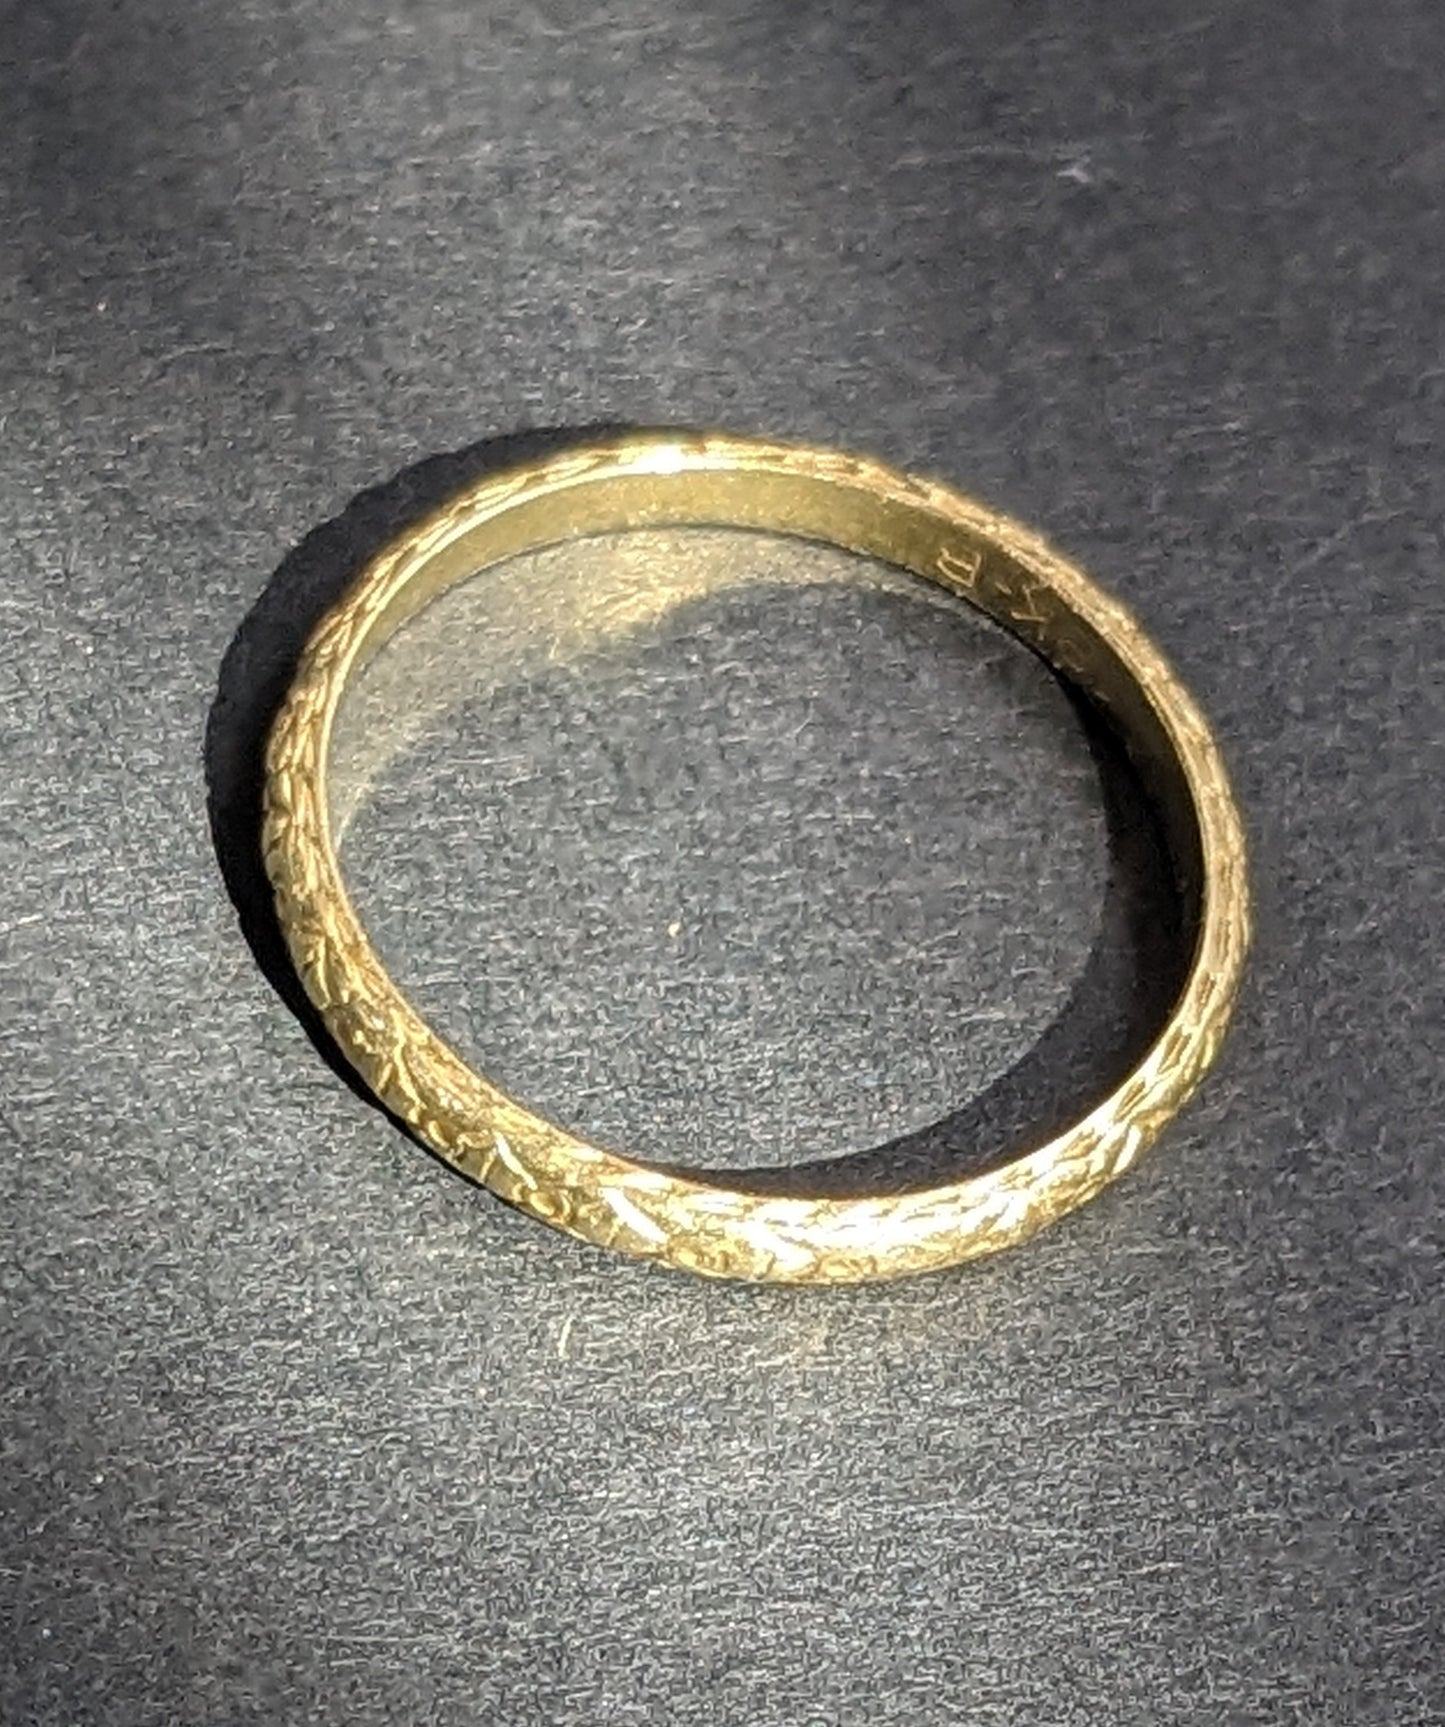 18k yellow gold engraved band